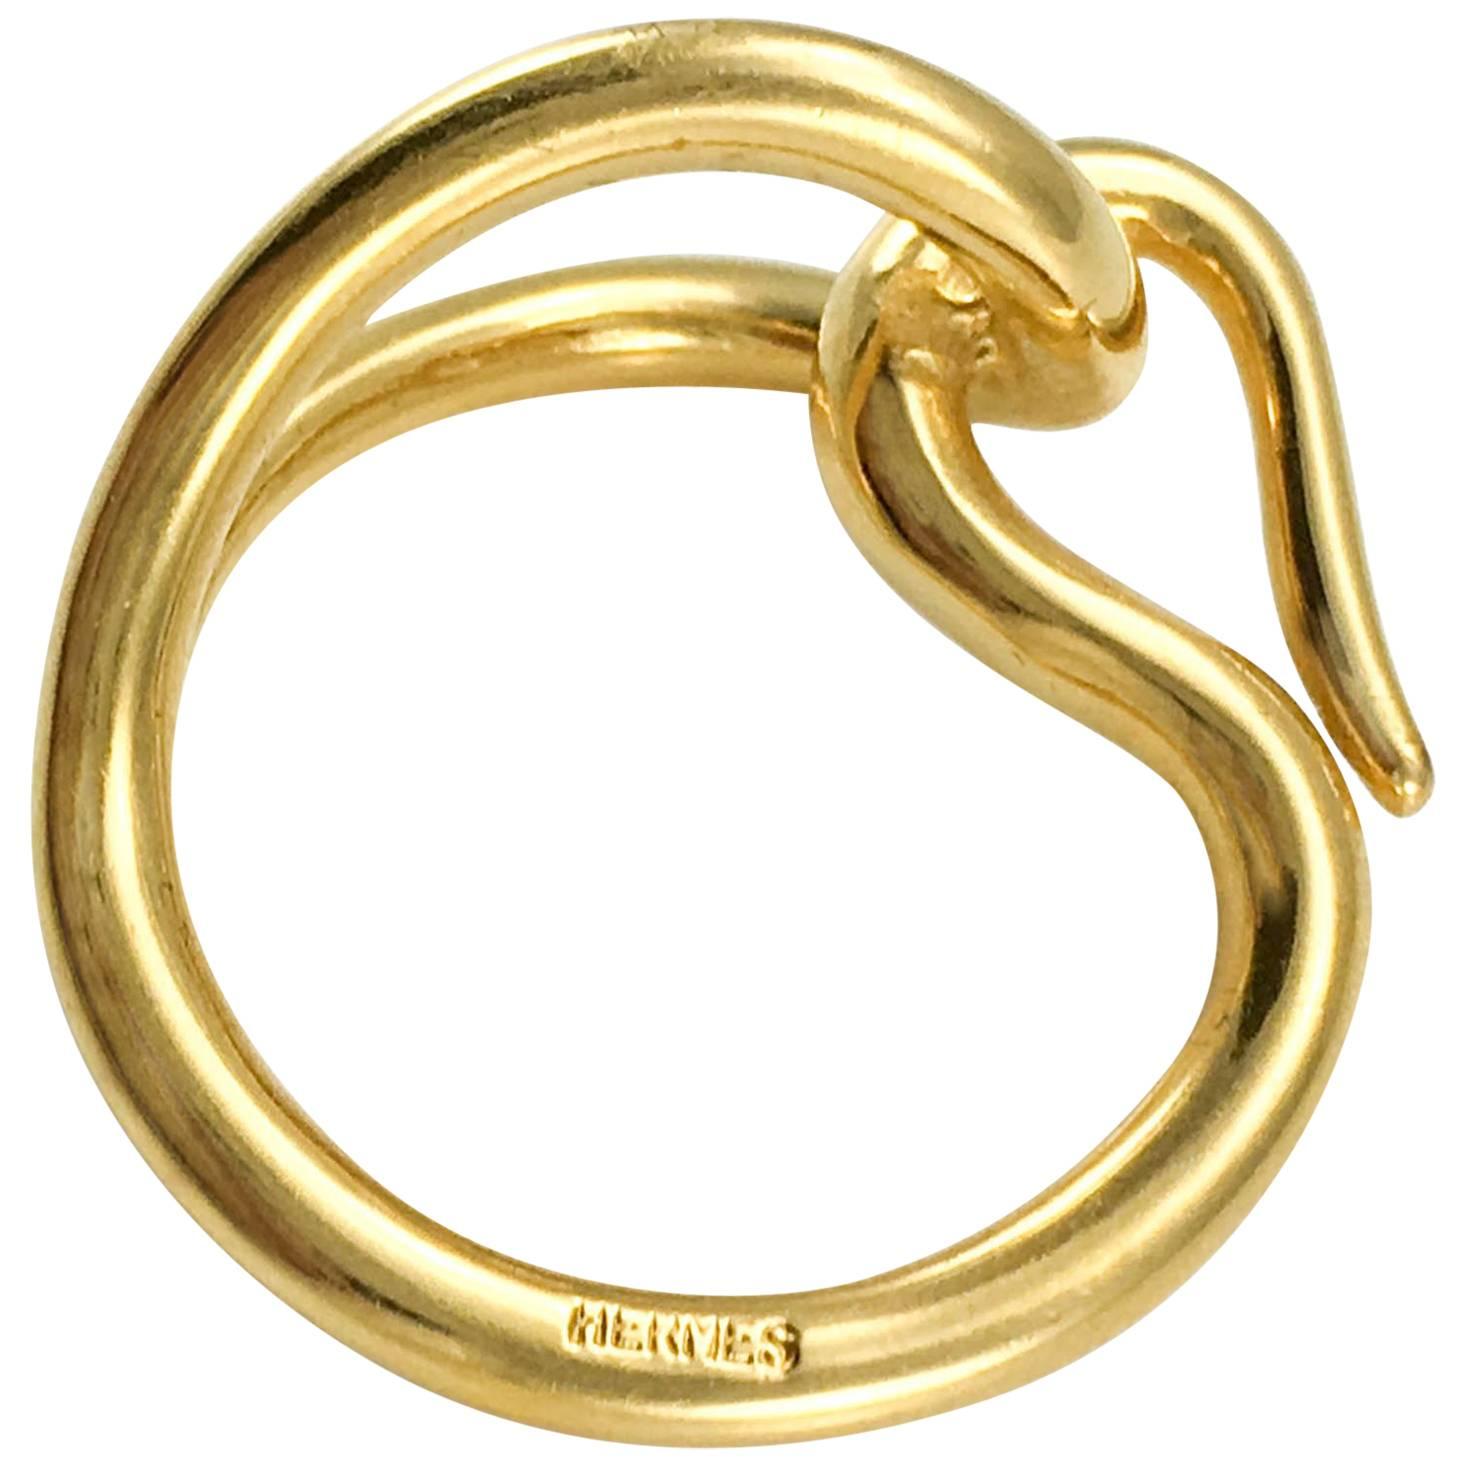 Hermes Gold-Tone Scarf Ring